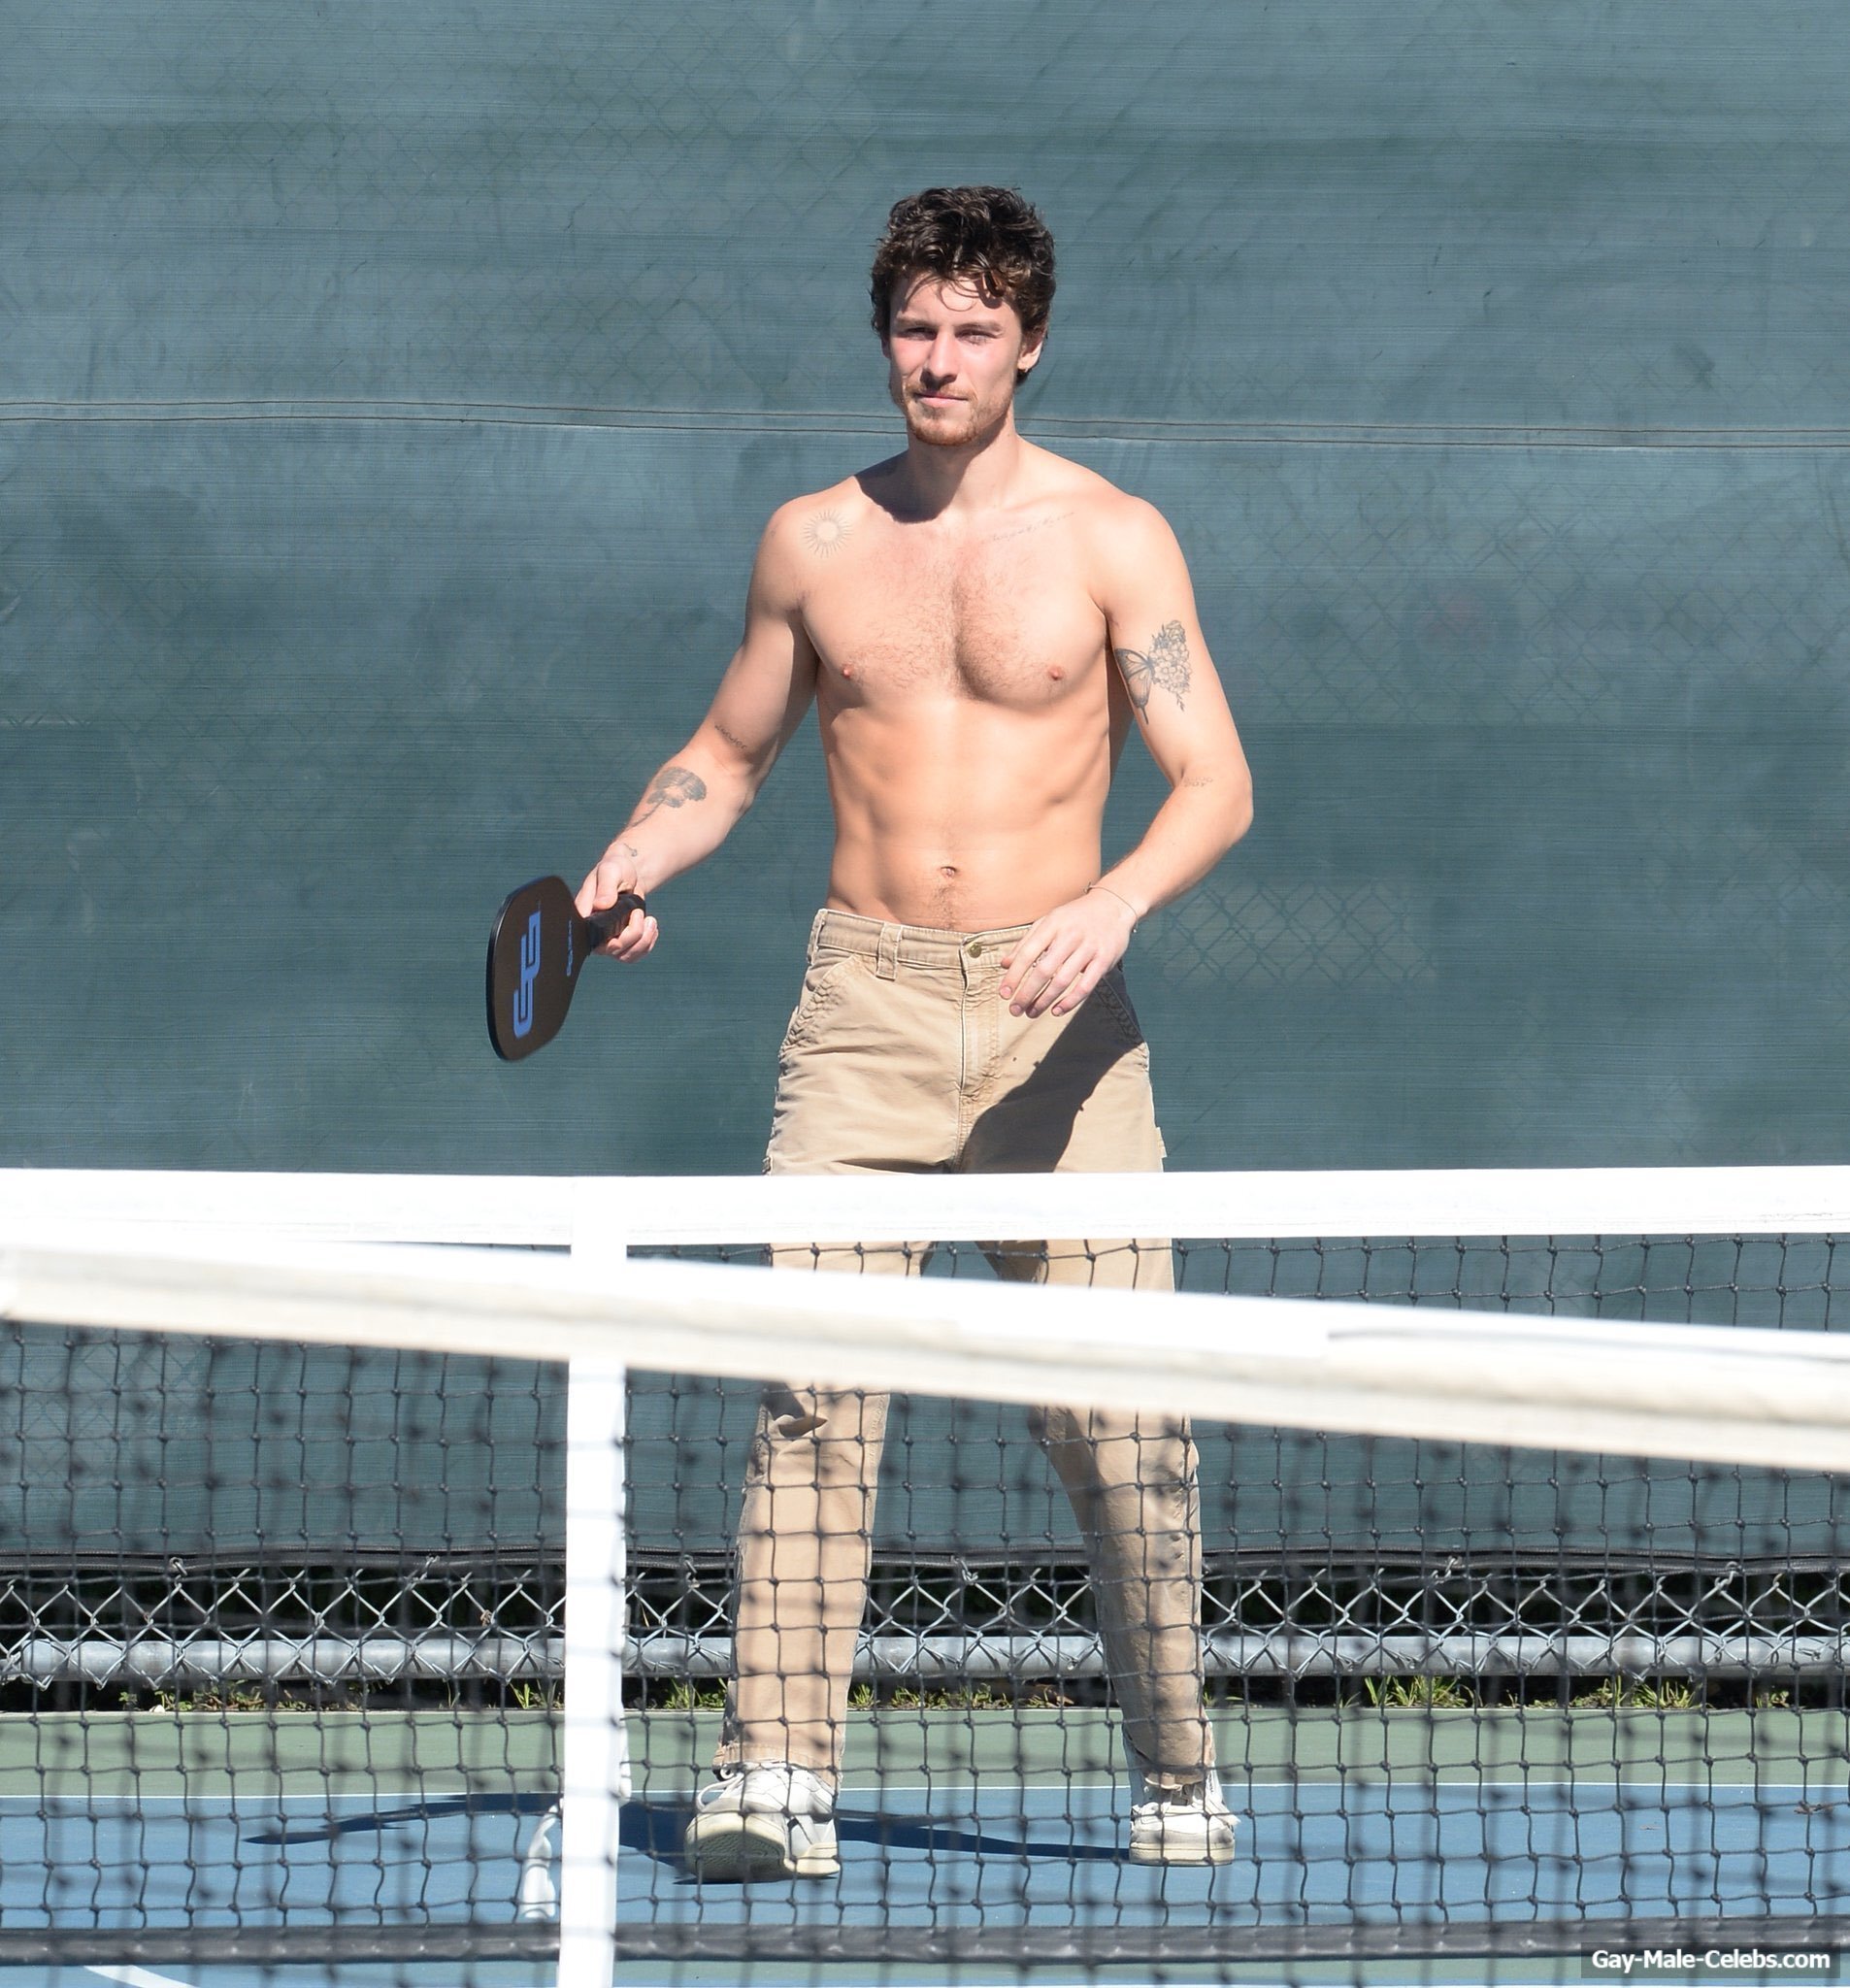 Shawn Mendes Shows His Nude Torso During Tennis